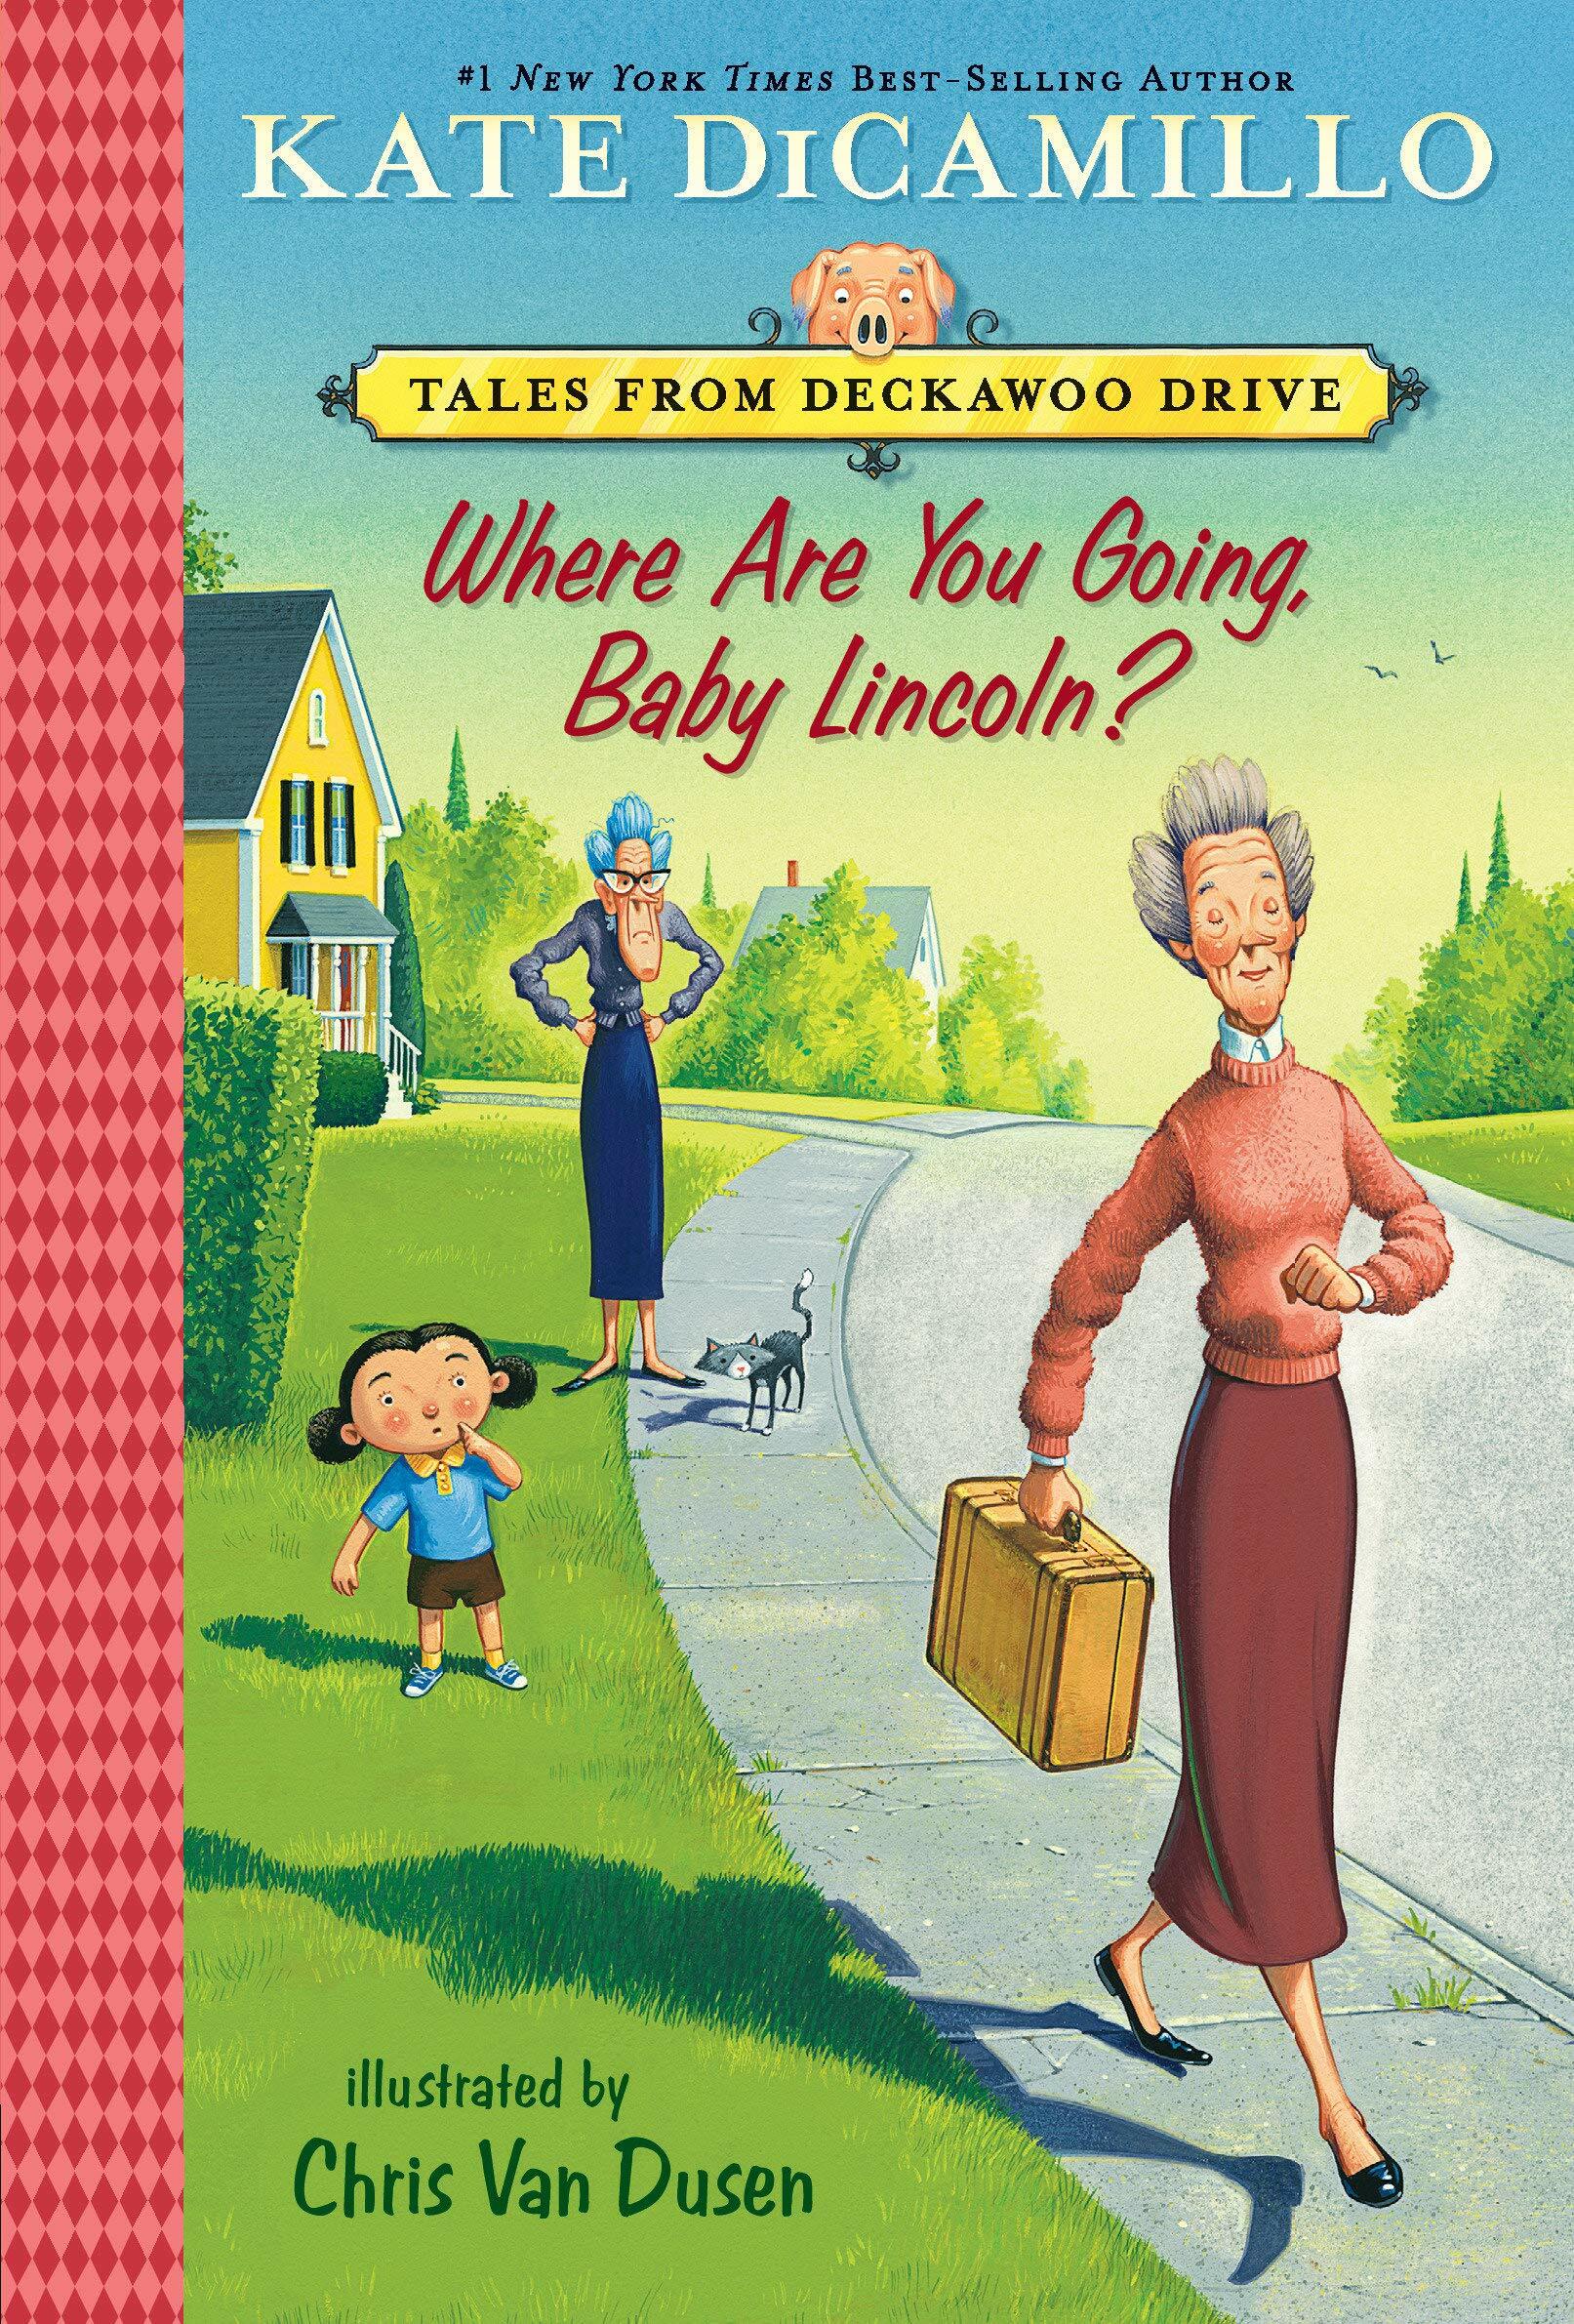 Where Are You Going, Baby Lincoln?: Tales from Deckawoo Drive, Volume Three (Paperback)